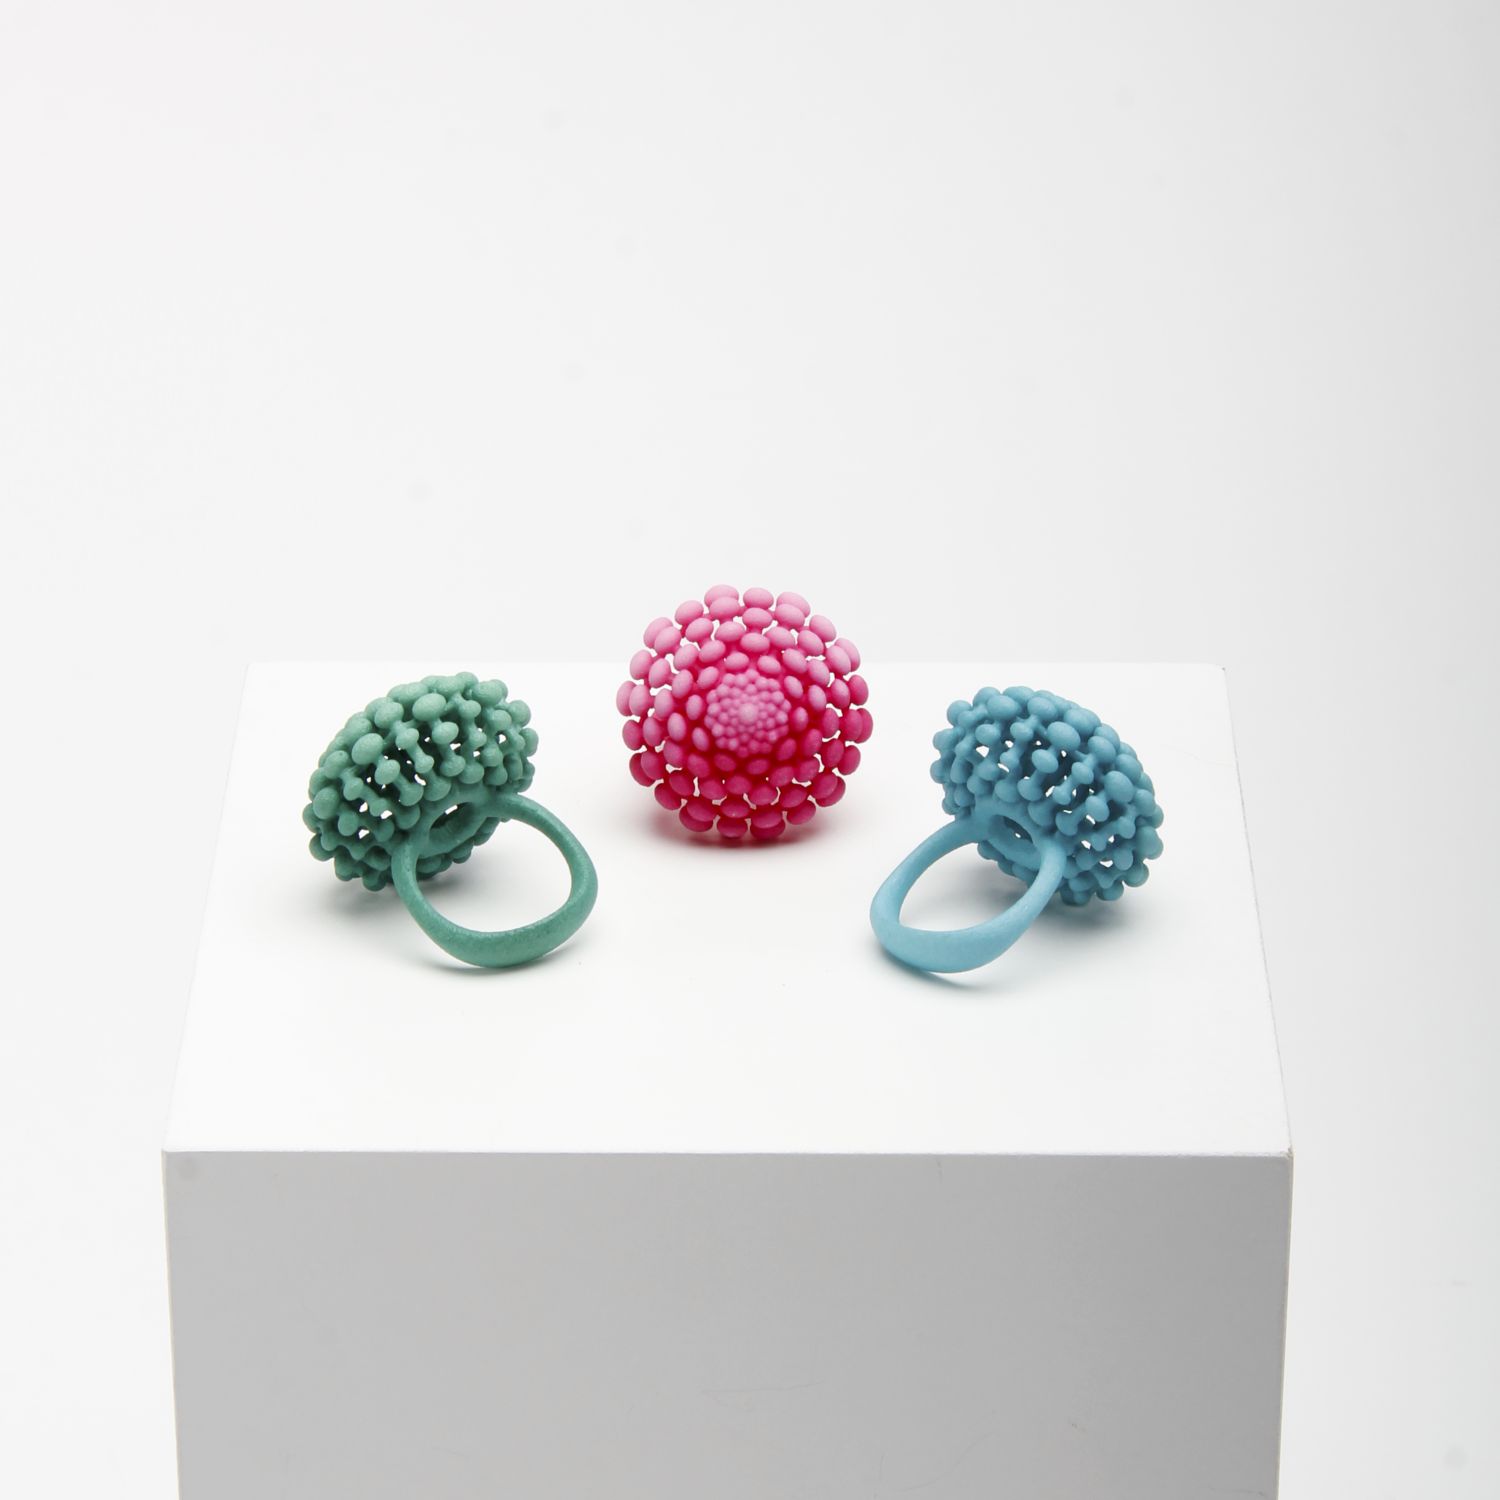 Kormar: Small Geometric Bloom Ring Product Image 2 of 5